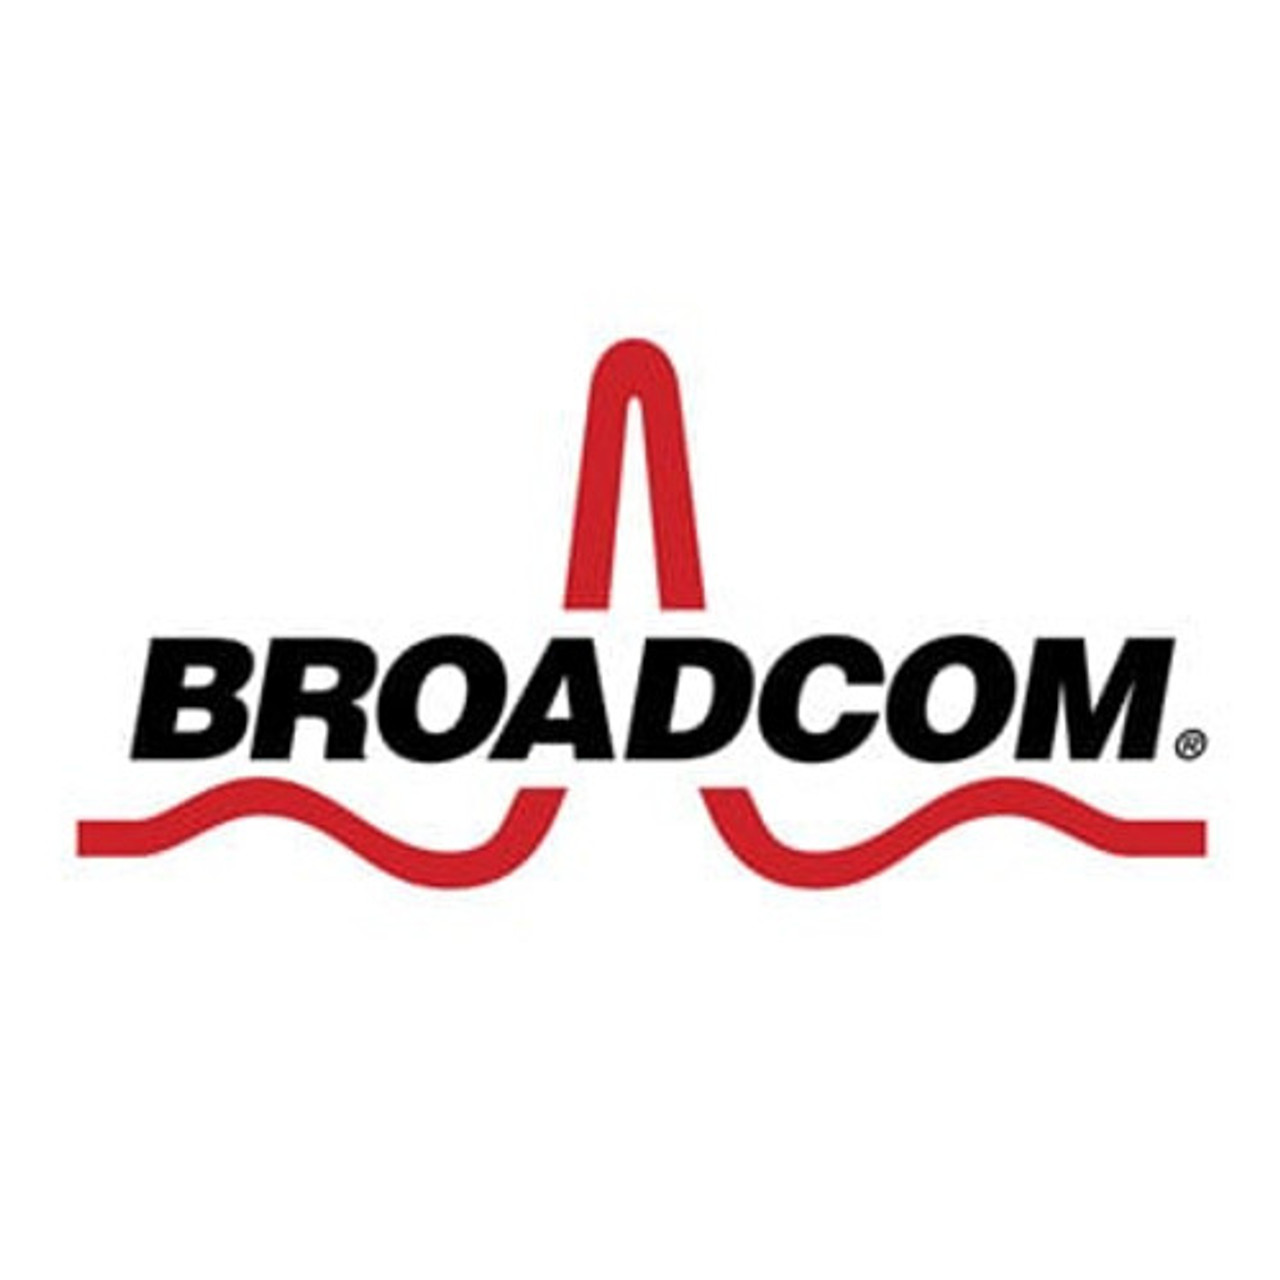 Broadcom 2.0 Commercial Software, File Inspection, McAfee AV, File Whitelist, 20000-49999 Users - 1 Year